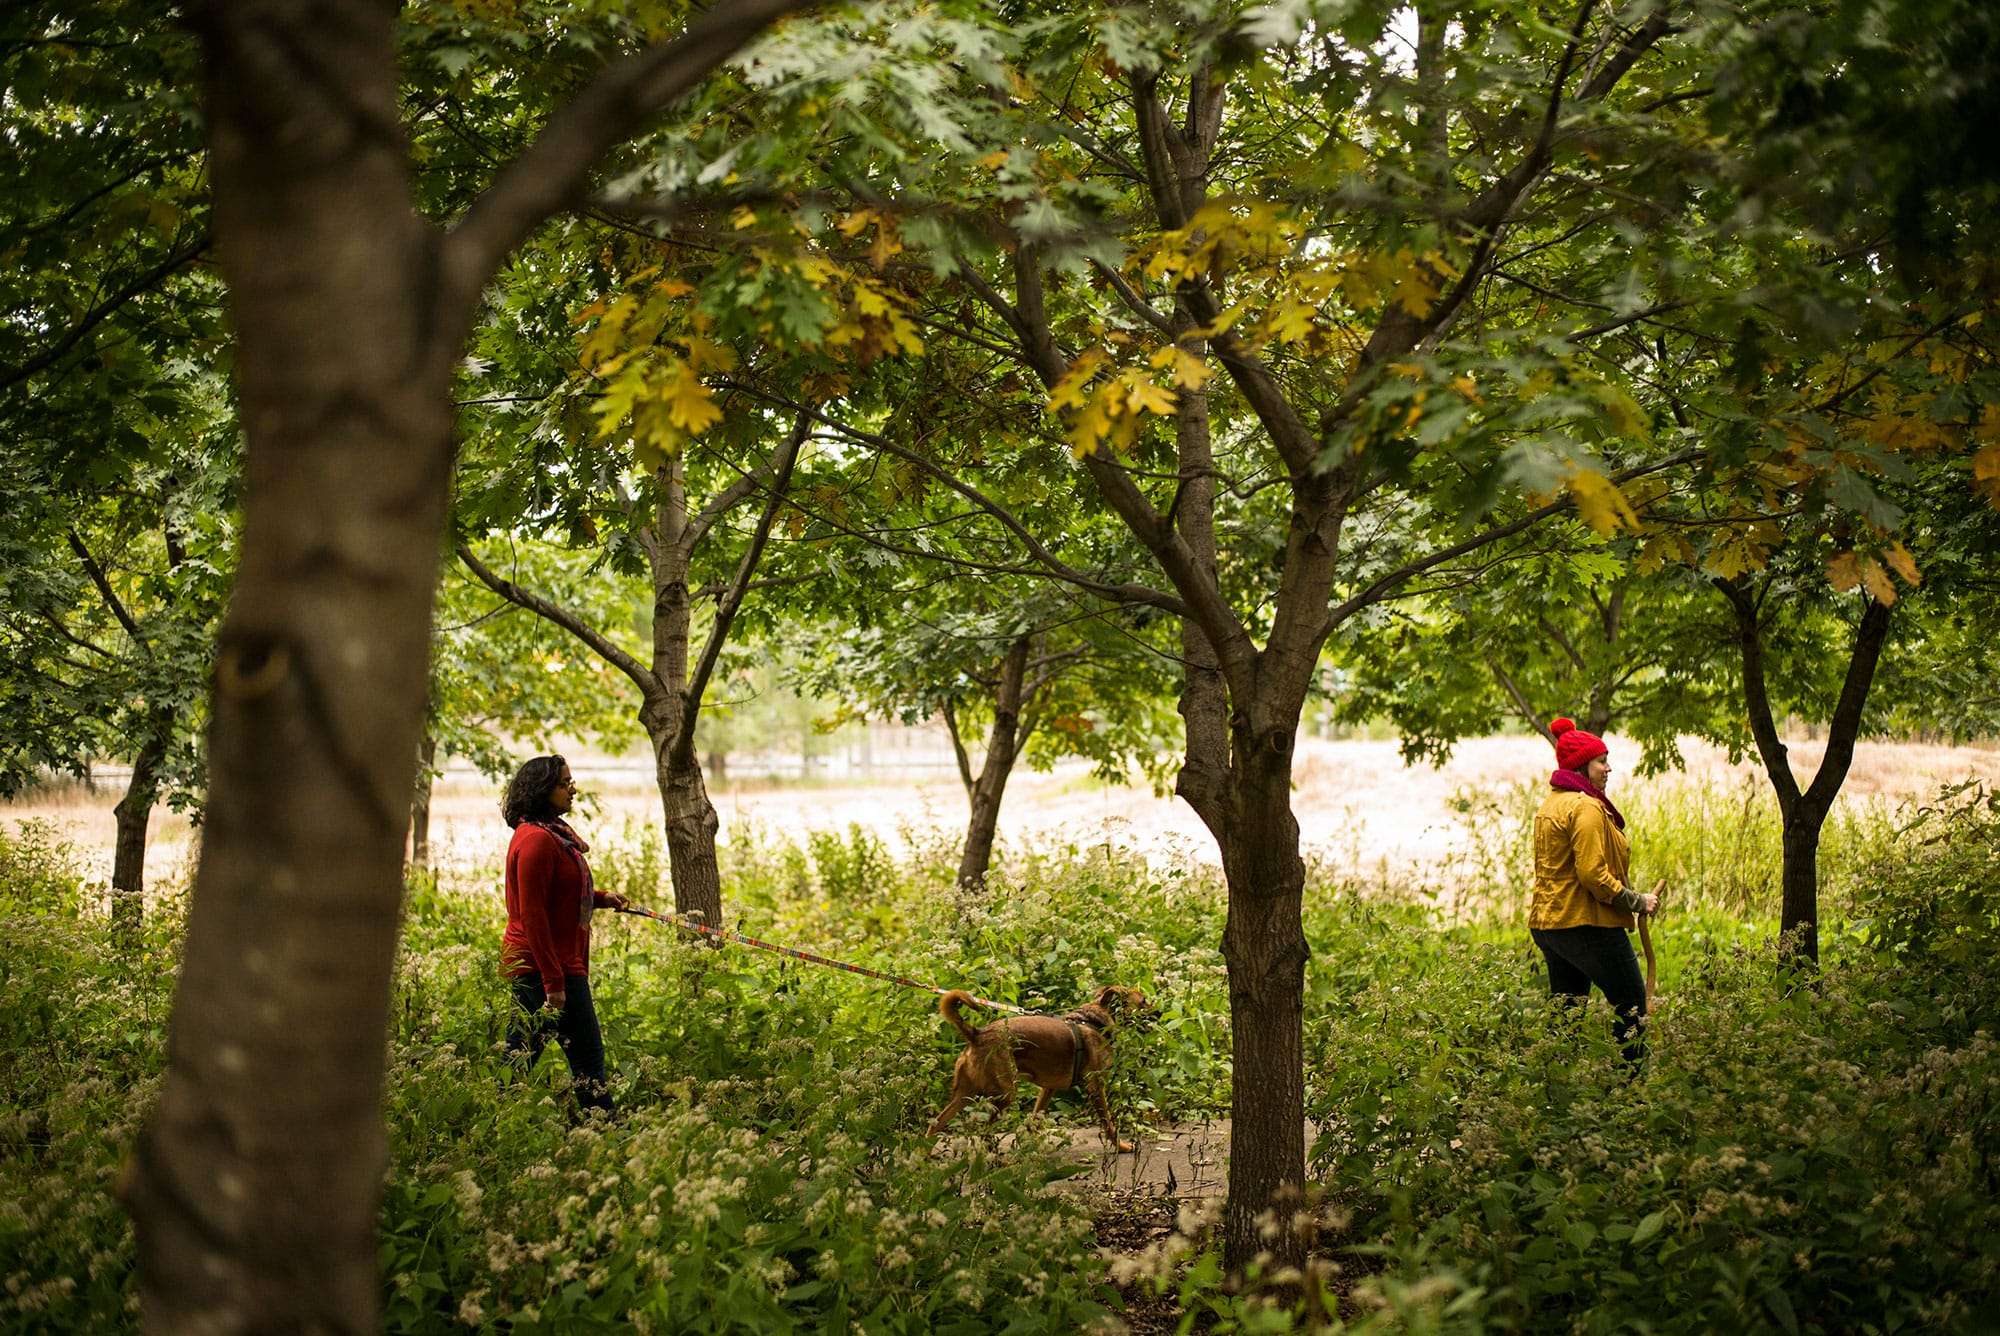 Two people walking a dog through a wooded area.